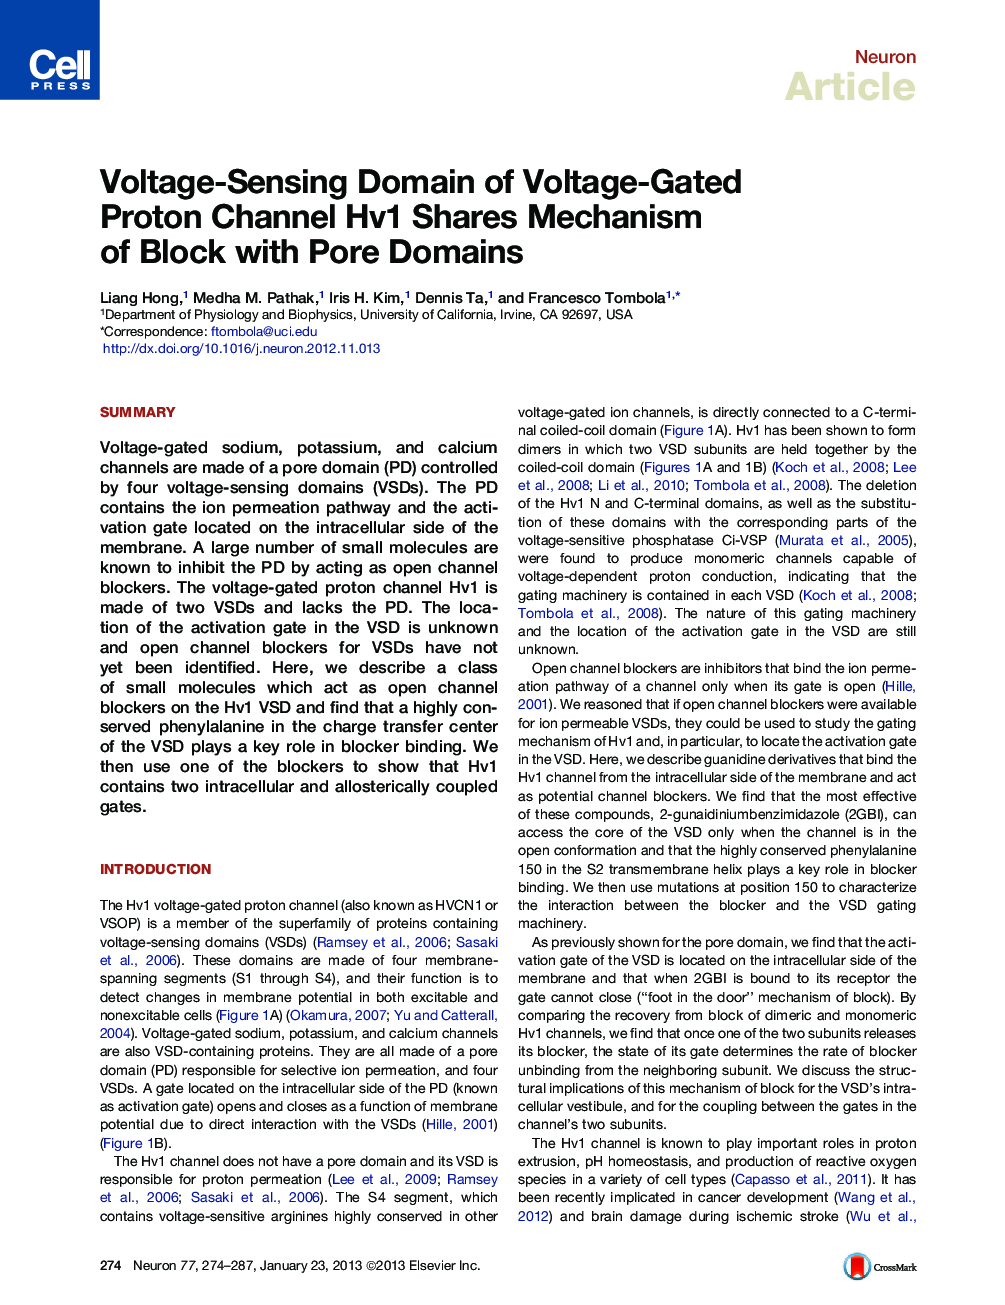 Voltage-Sensing Domain of Voltage-Gated Proton Channel Hv1 Shares Mechanism of Block with Pore Domains